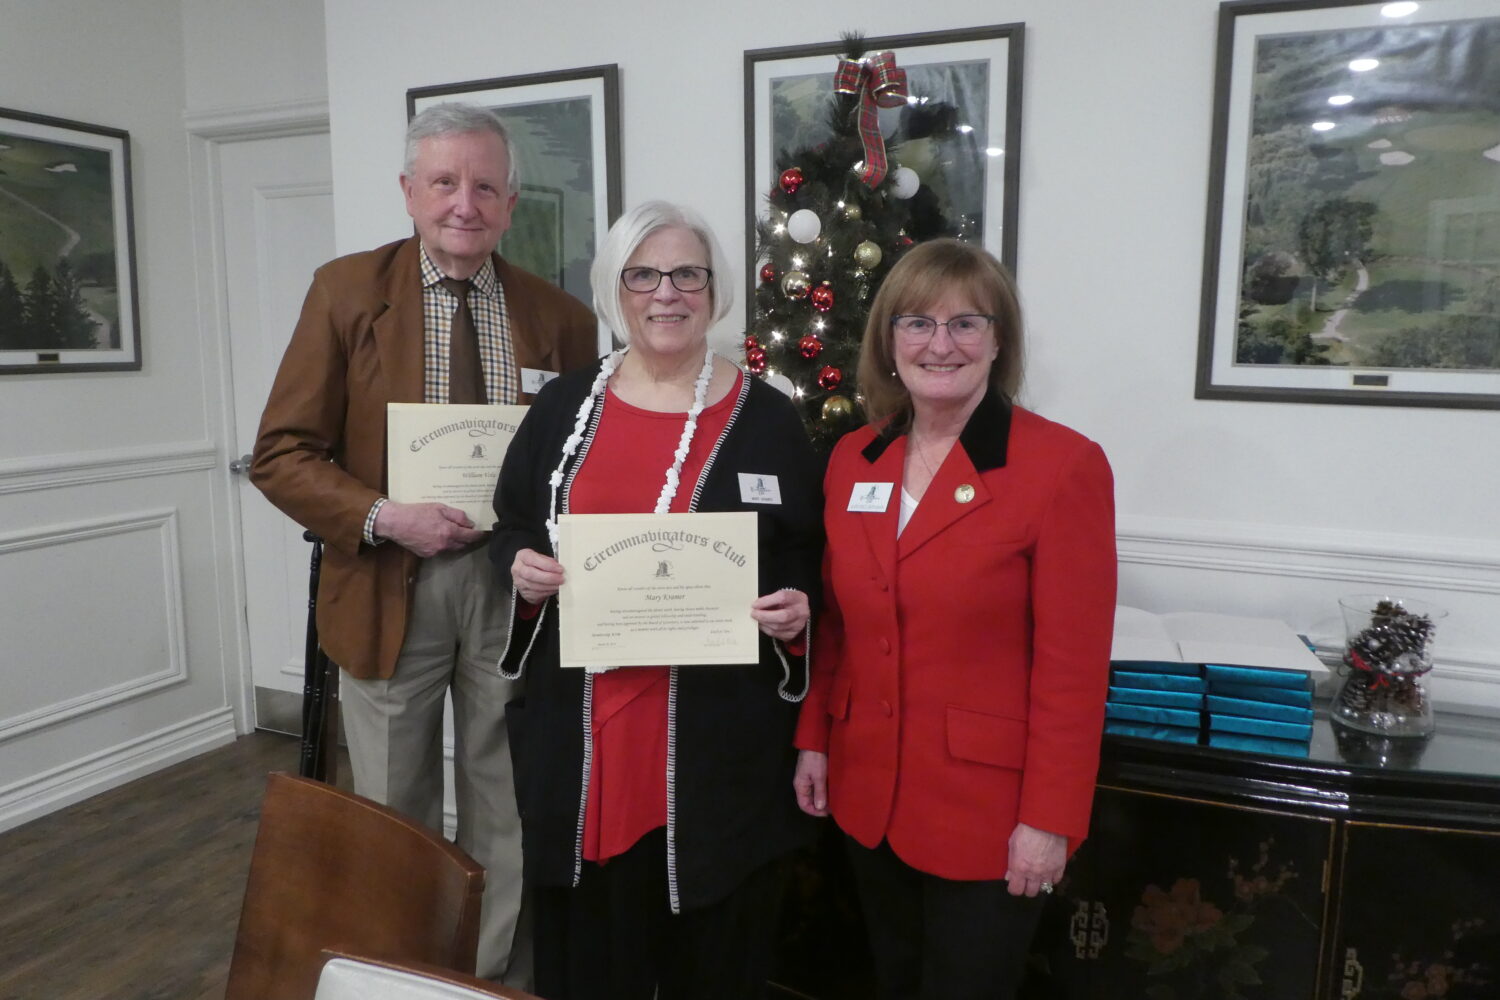 Chapter President Kathy Sinclair welcomes new members Bill Volz and Mary Kramer2